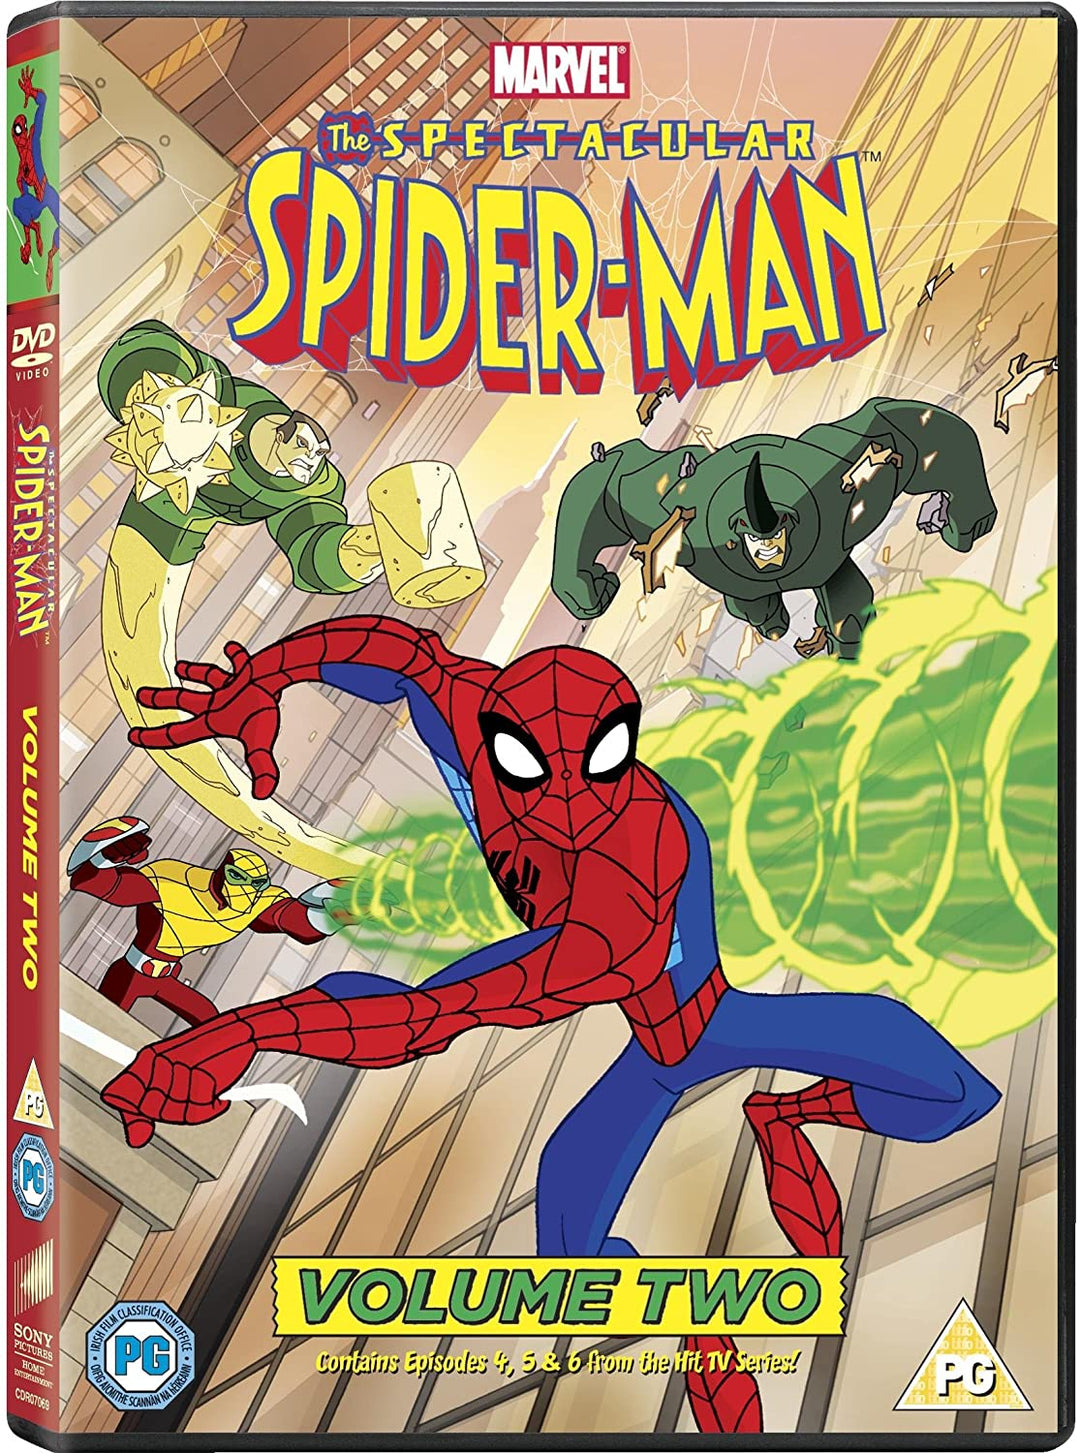 The Spectacular Spider-Man - Volume Two [2010] - Action fiction [DVD]